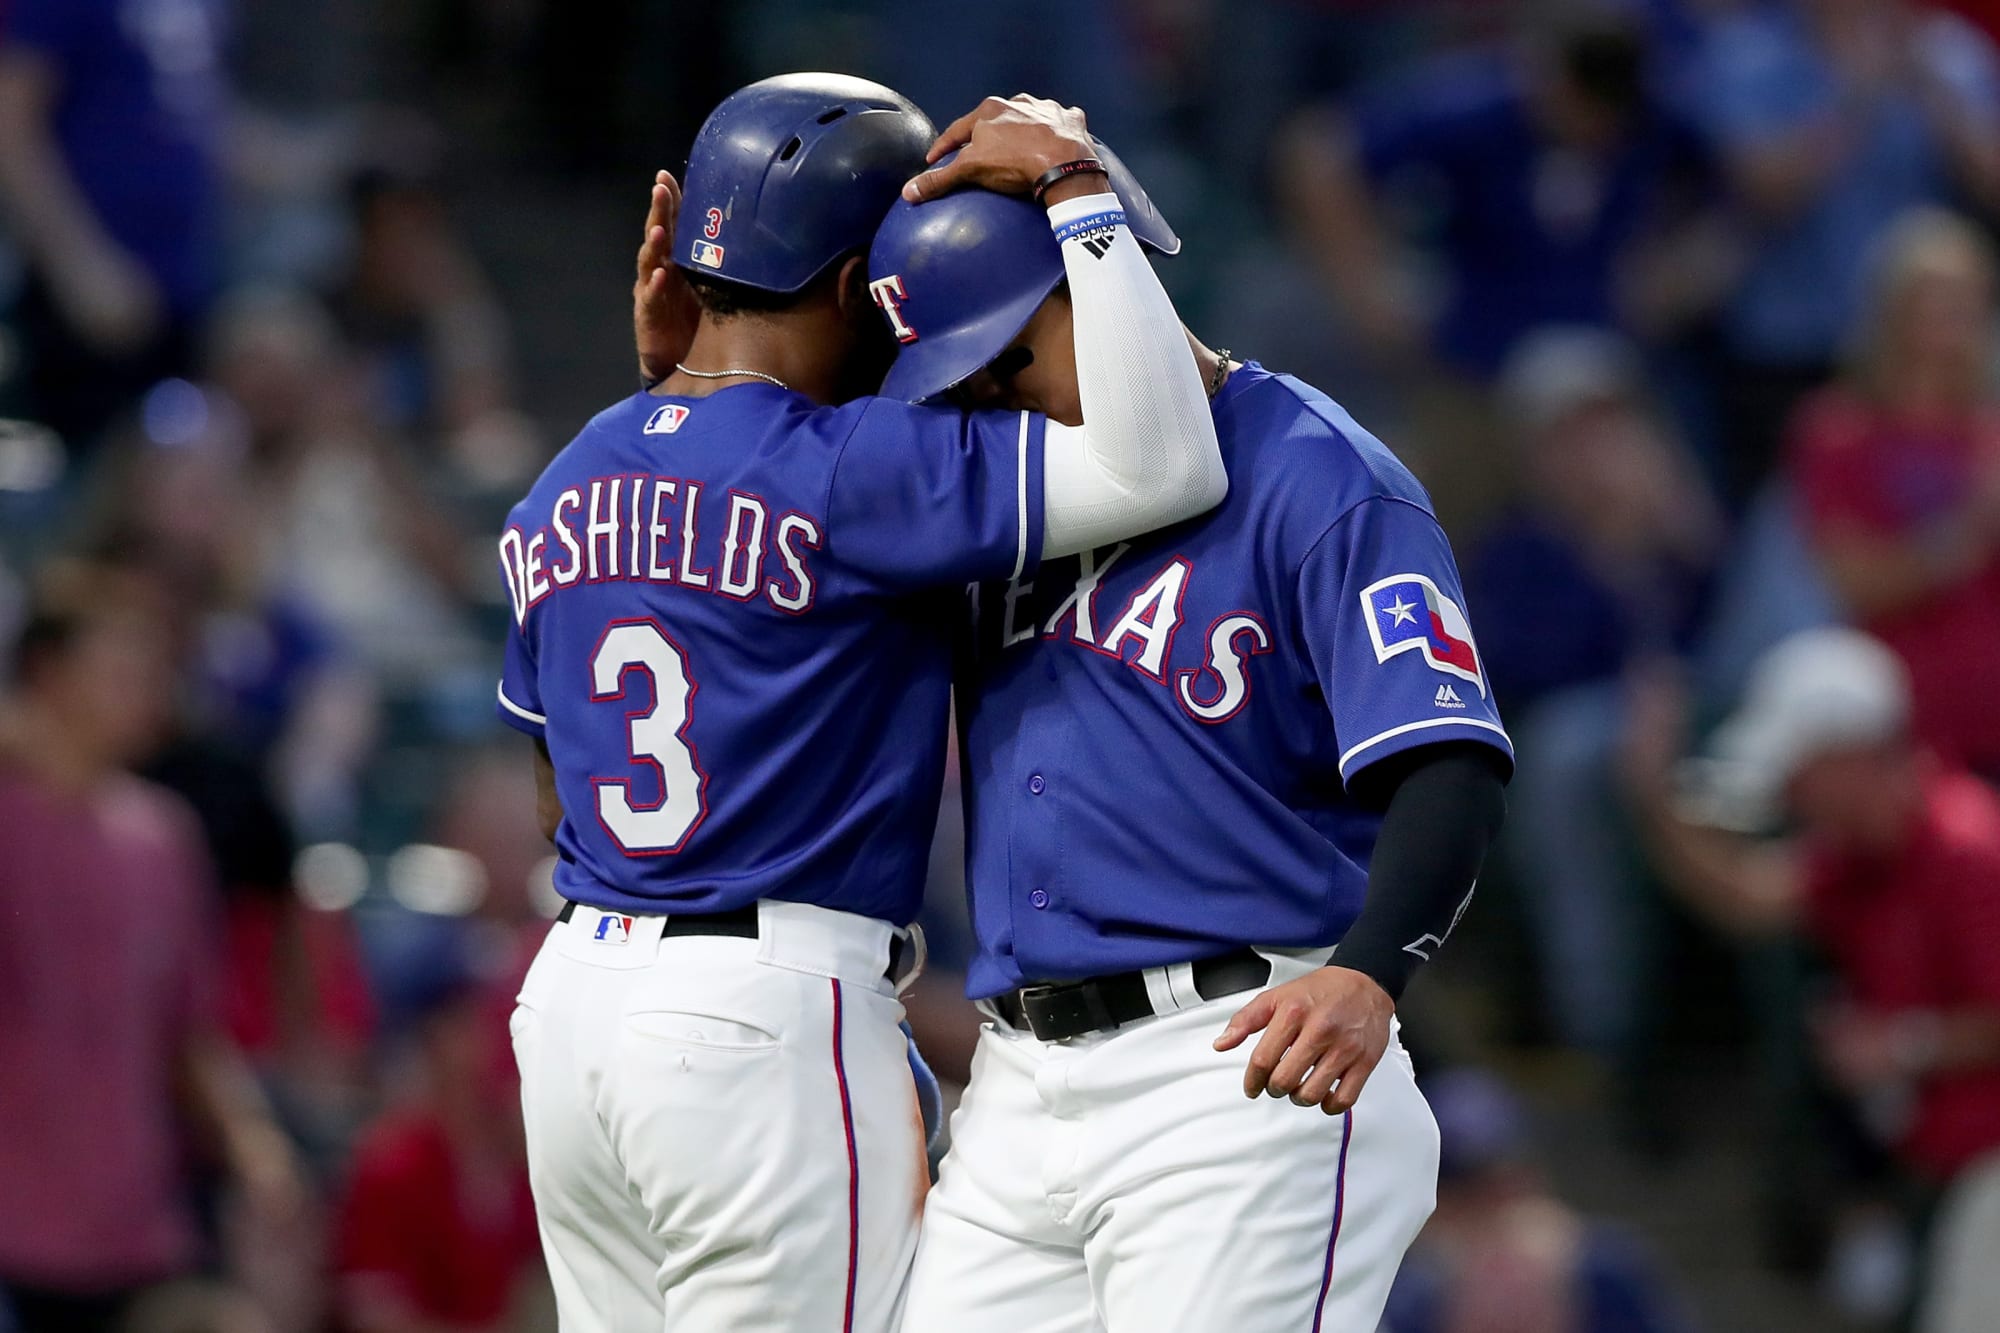 Texas Rangers: Team suffers another disappointing series